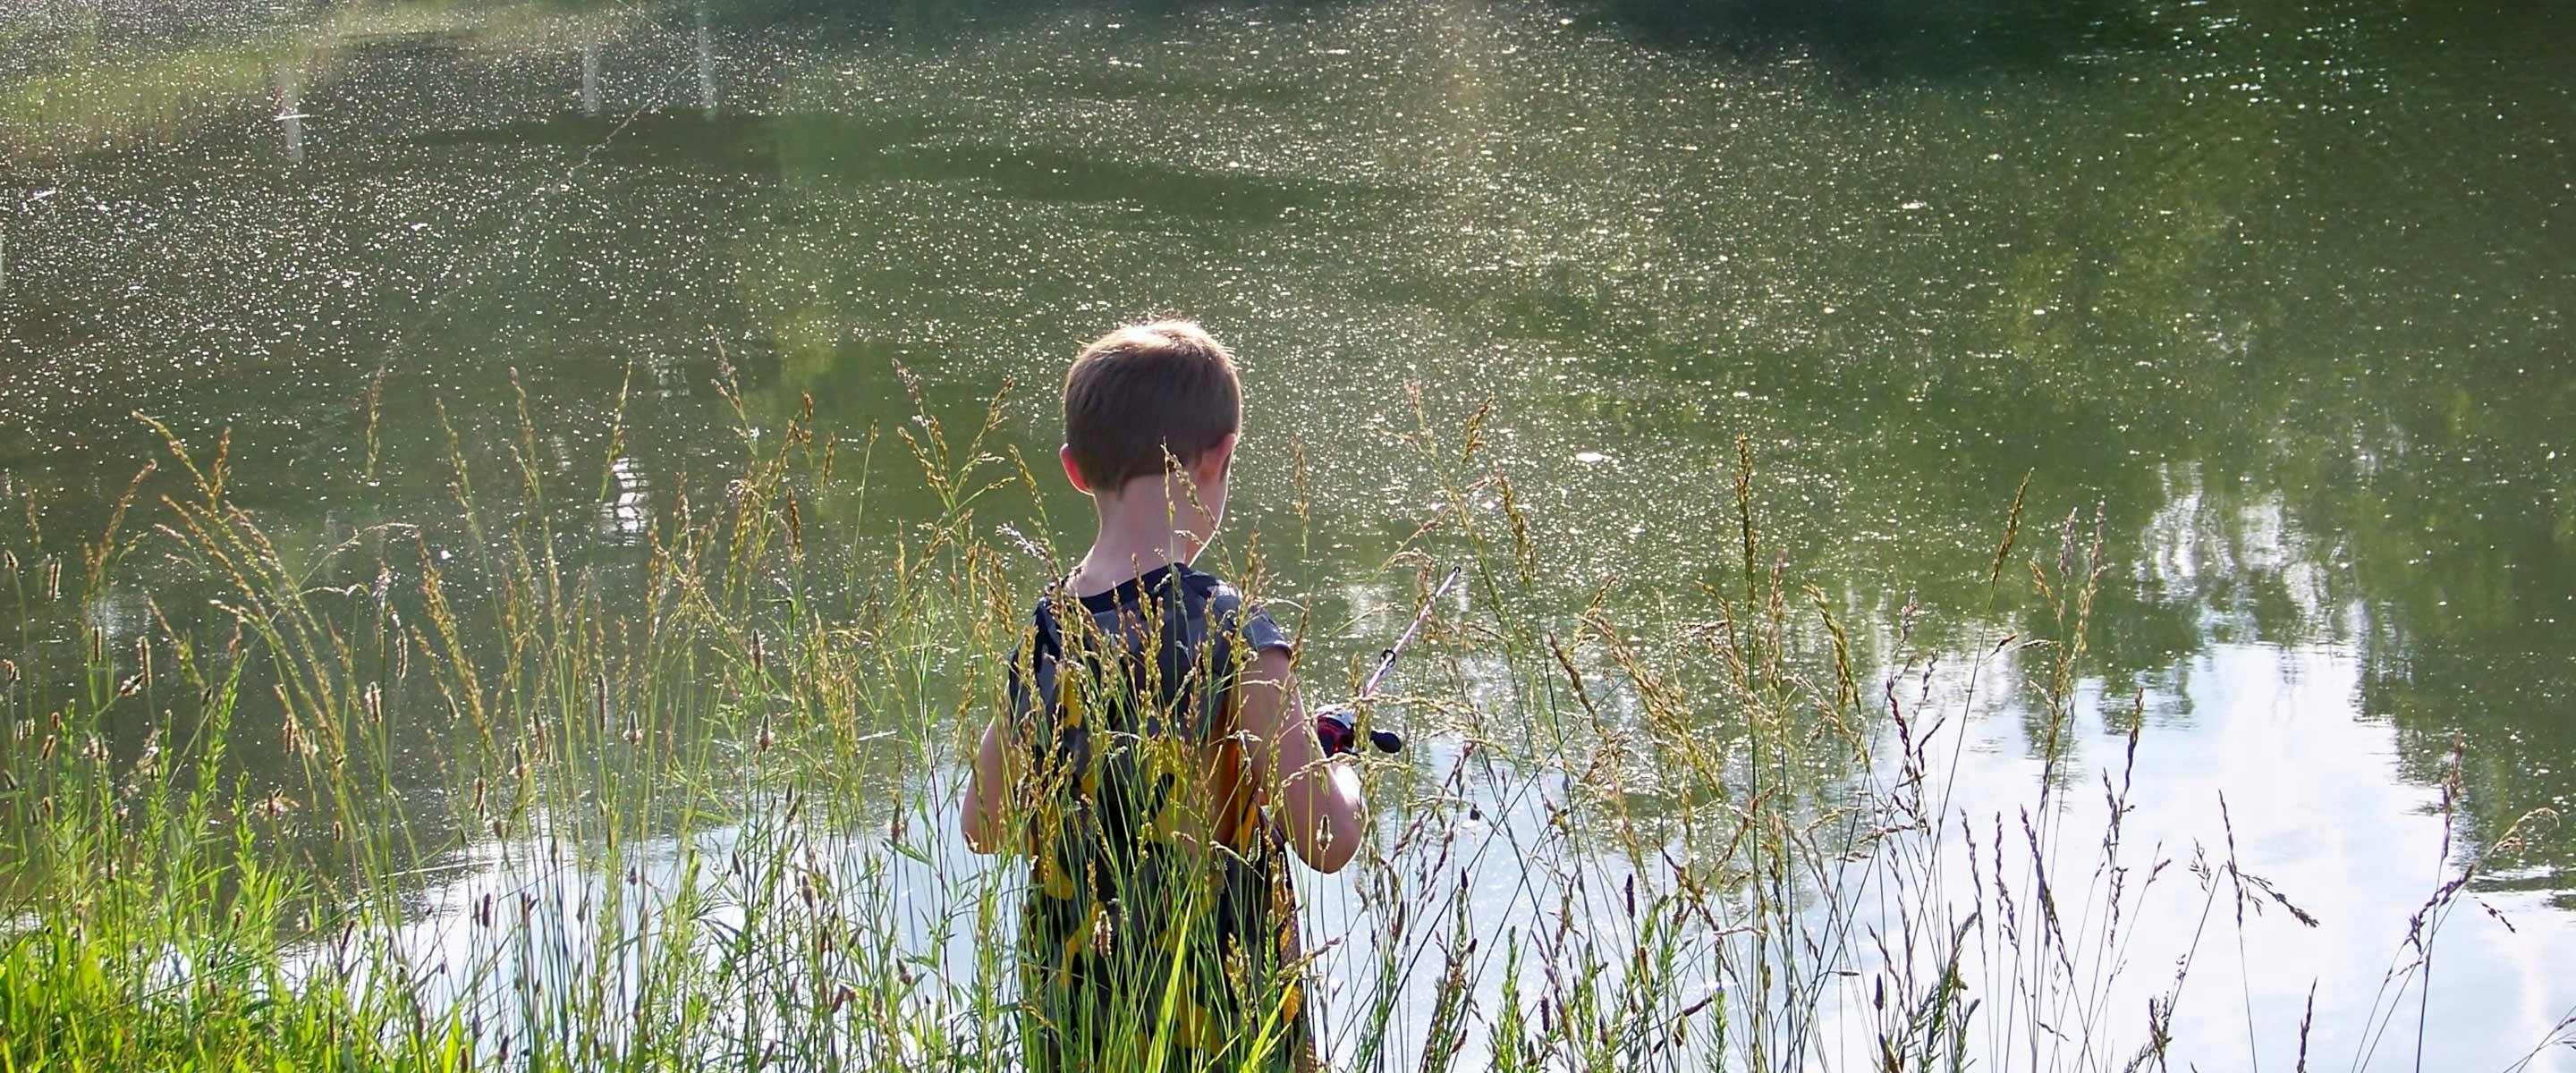 boy fishing with pole from shore